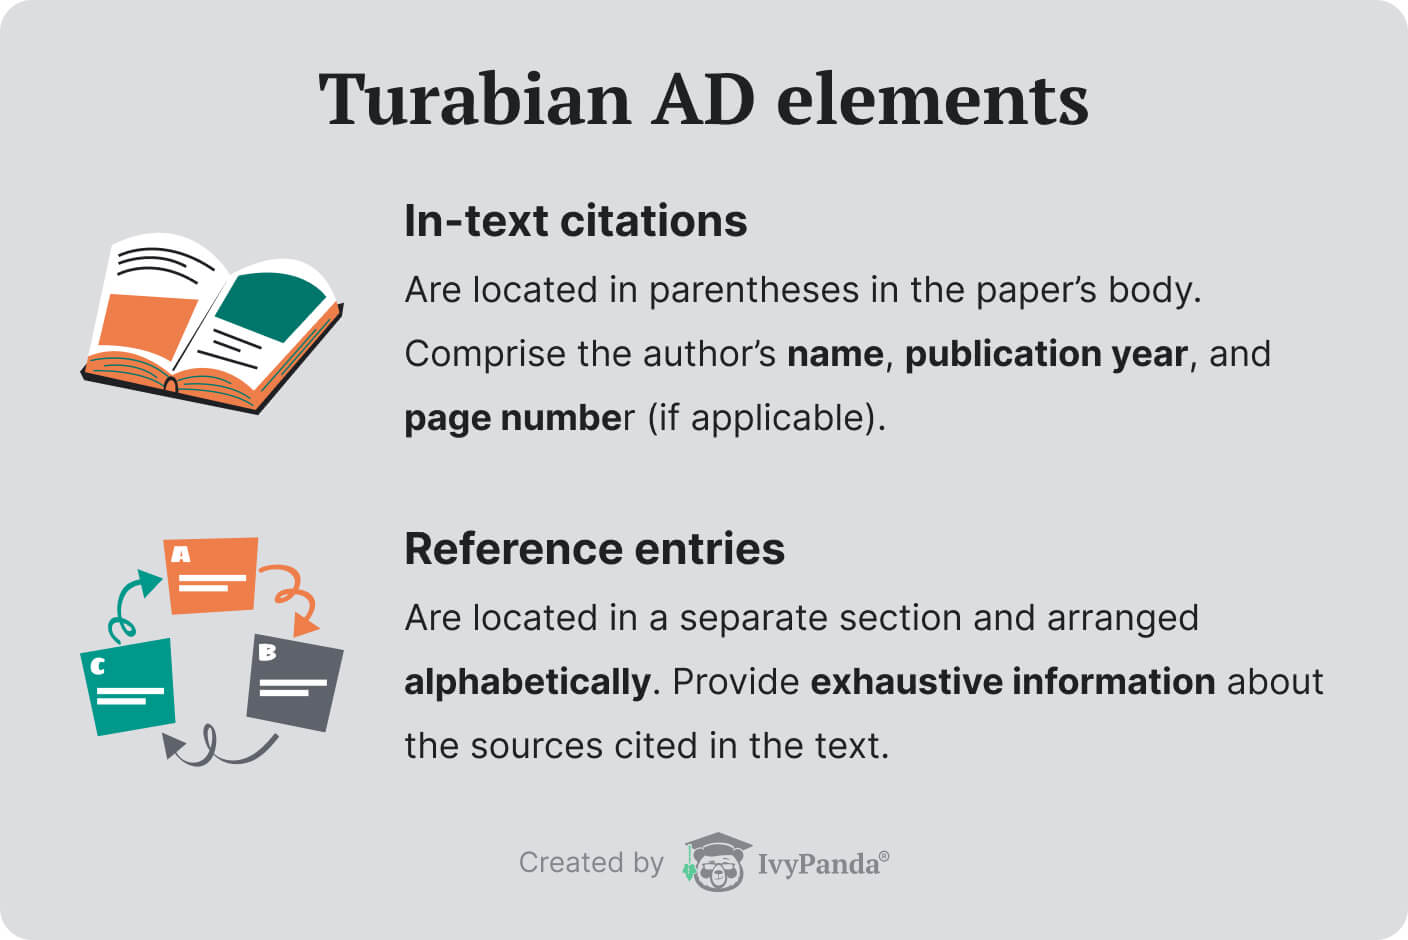 The picture lists the elements of the Turabian author-date method.